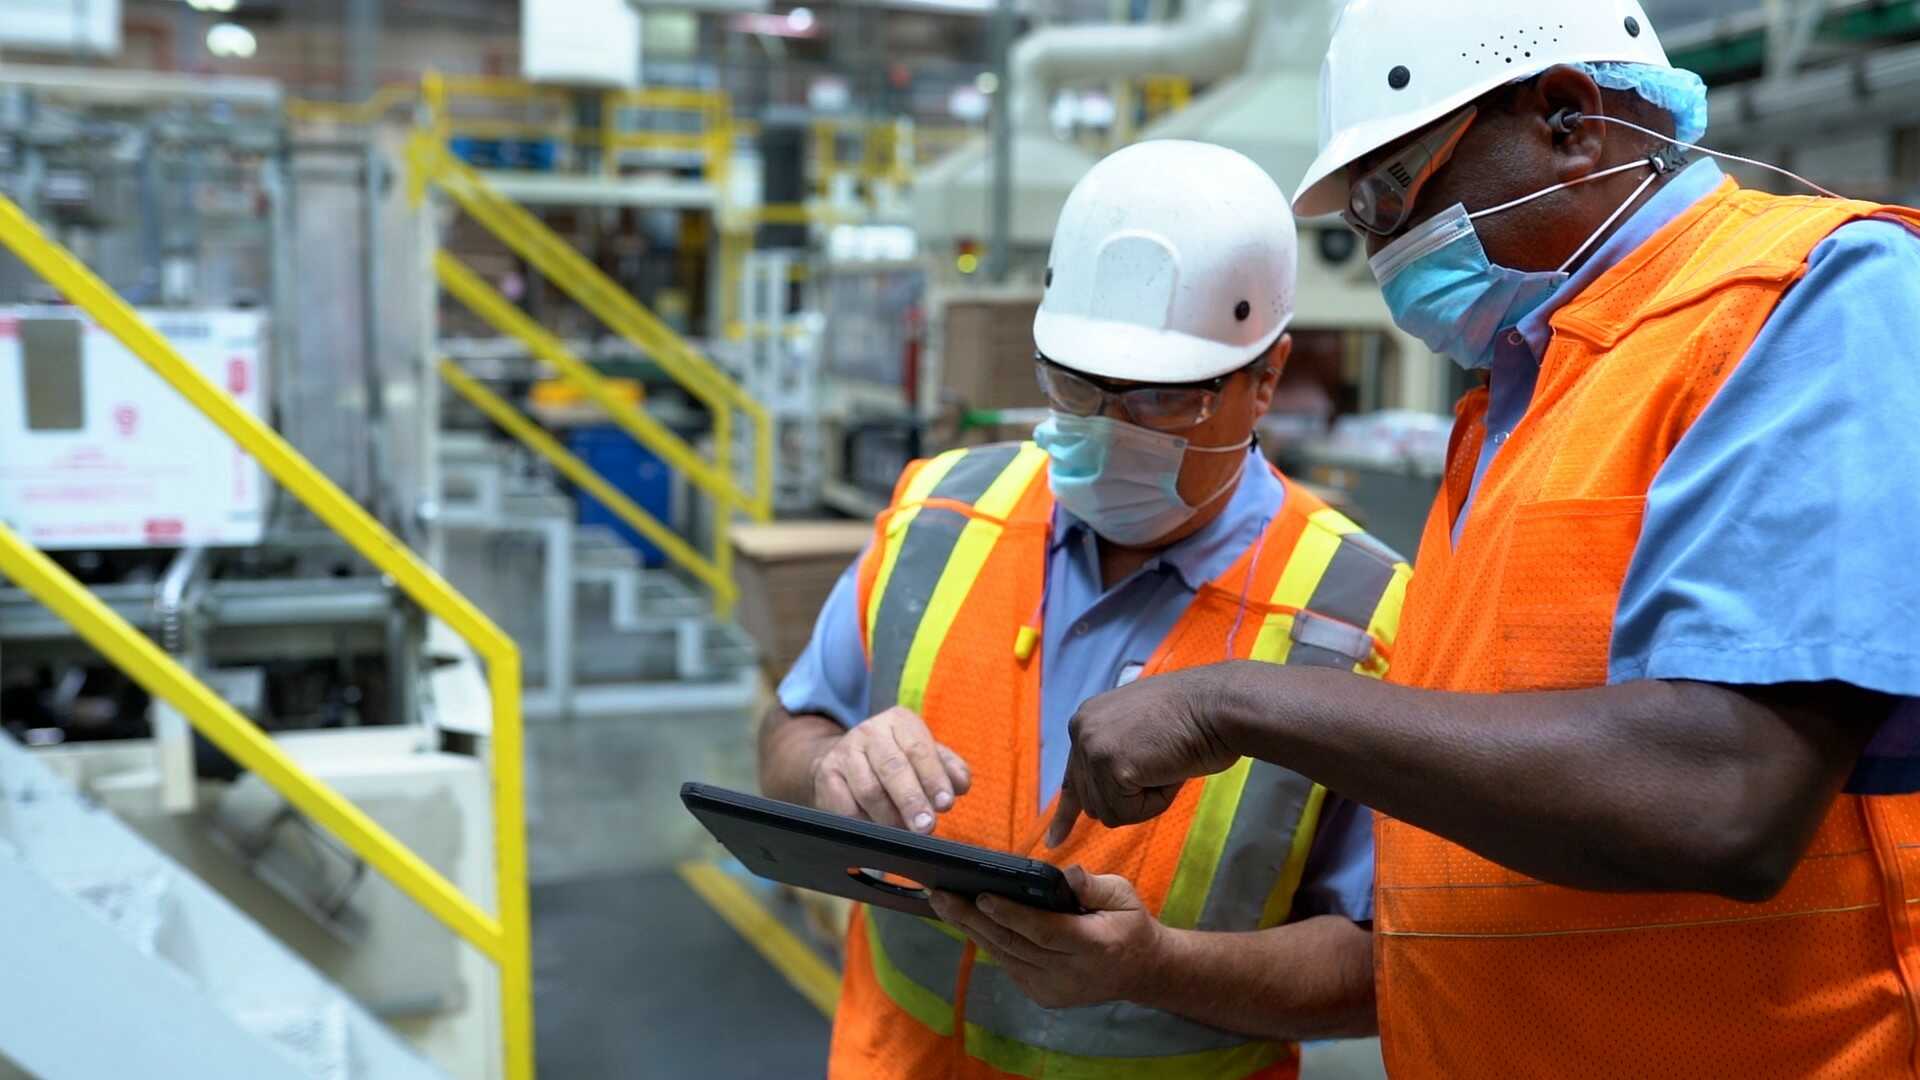 Nestlé factory workers collaborating